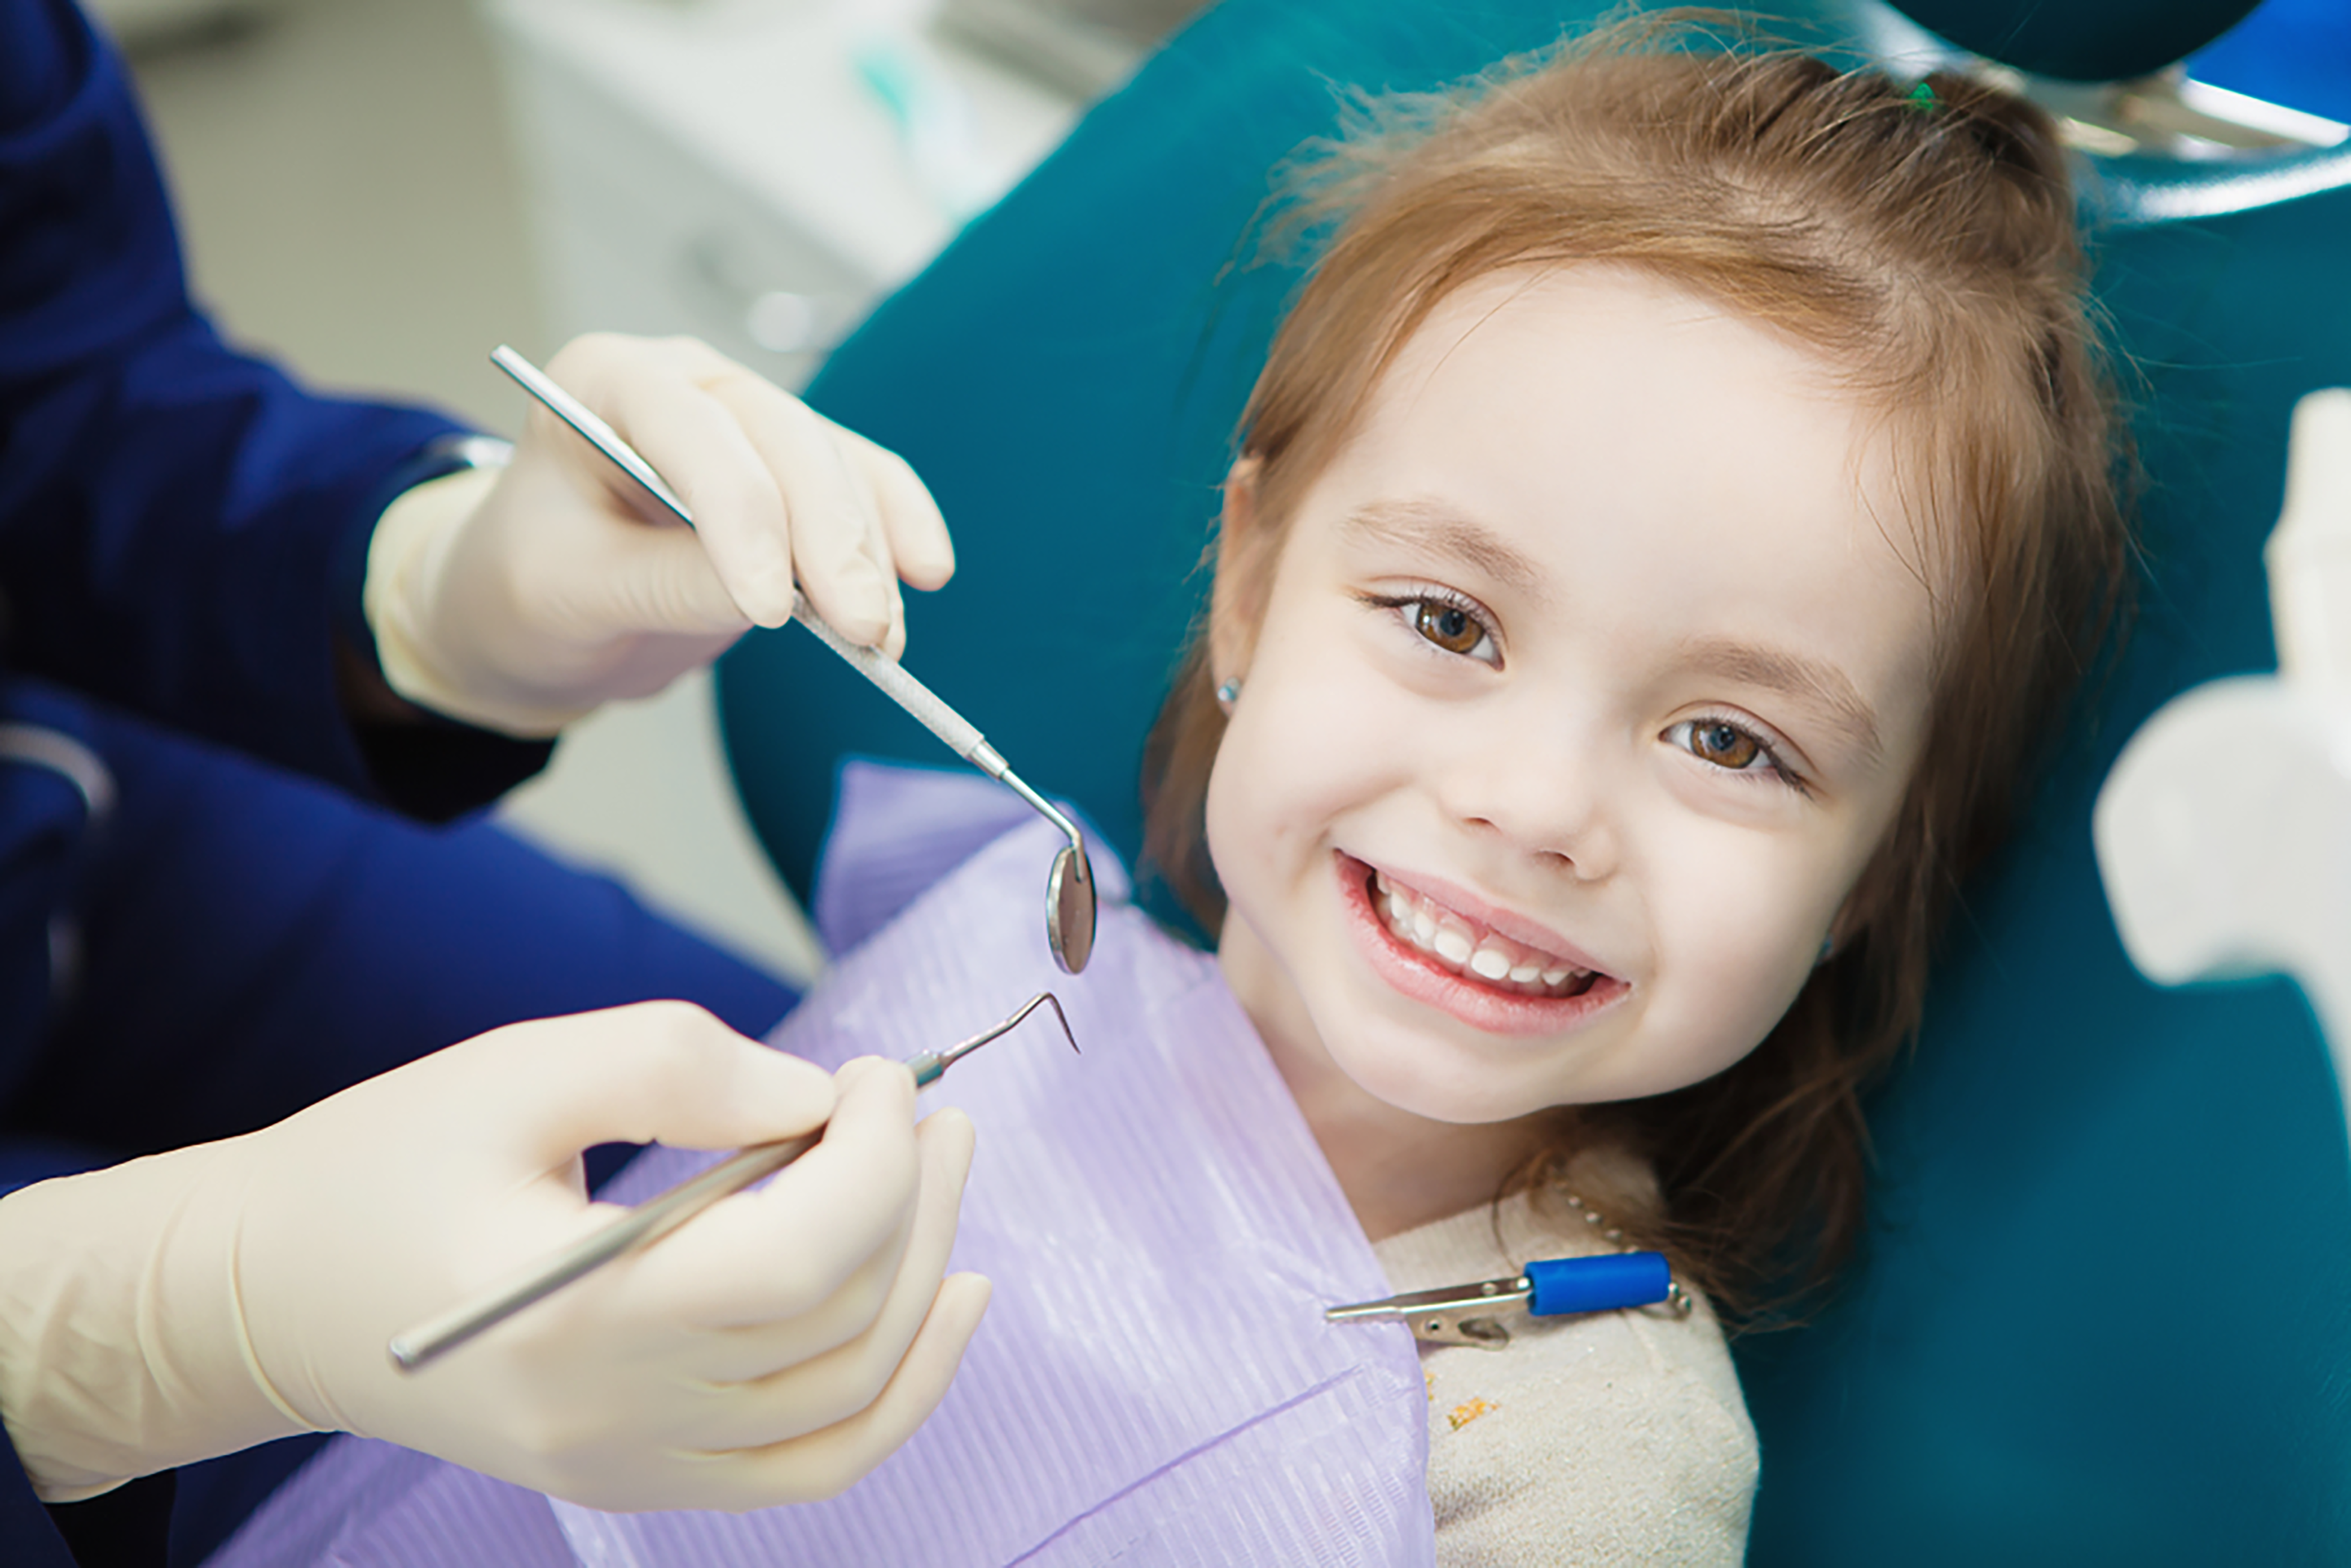 facilitating for your child and their oral care needs